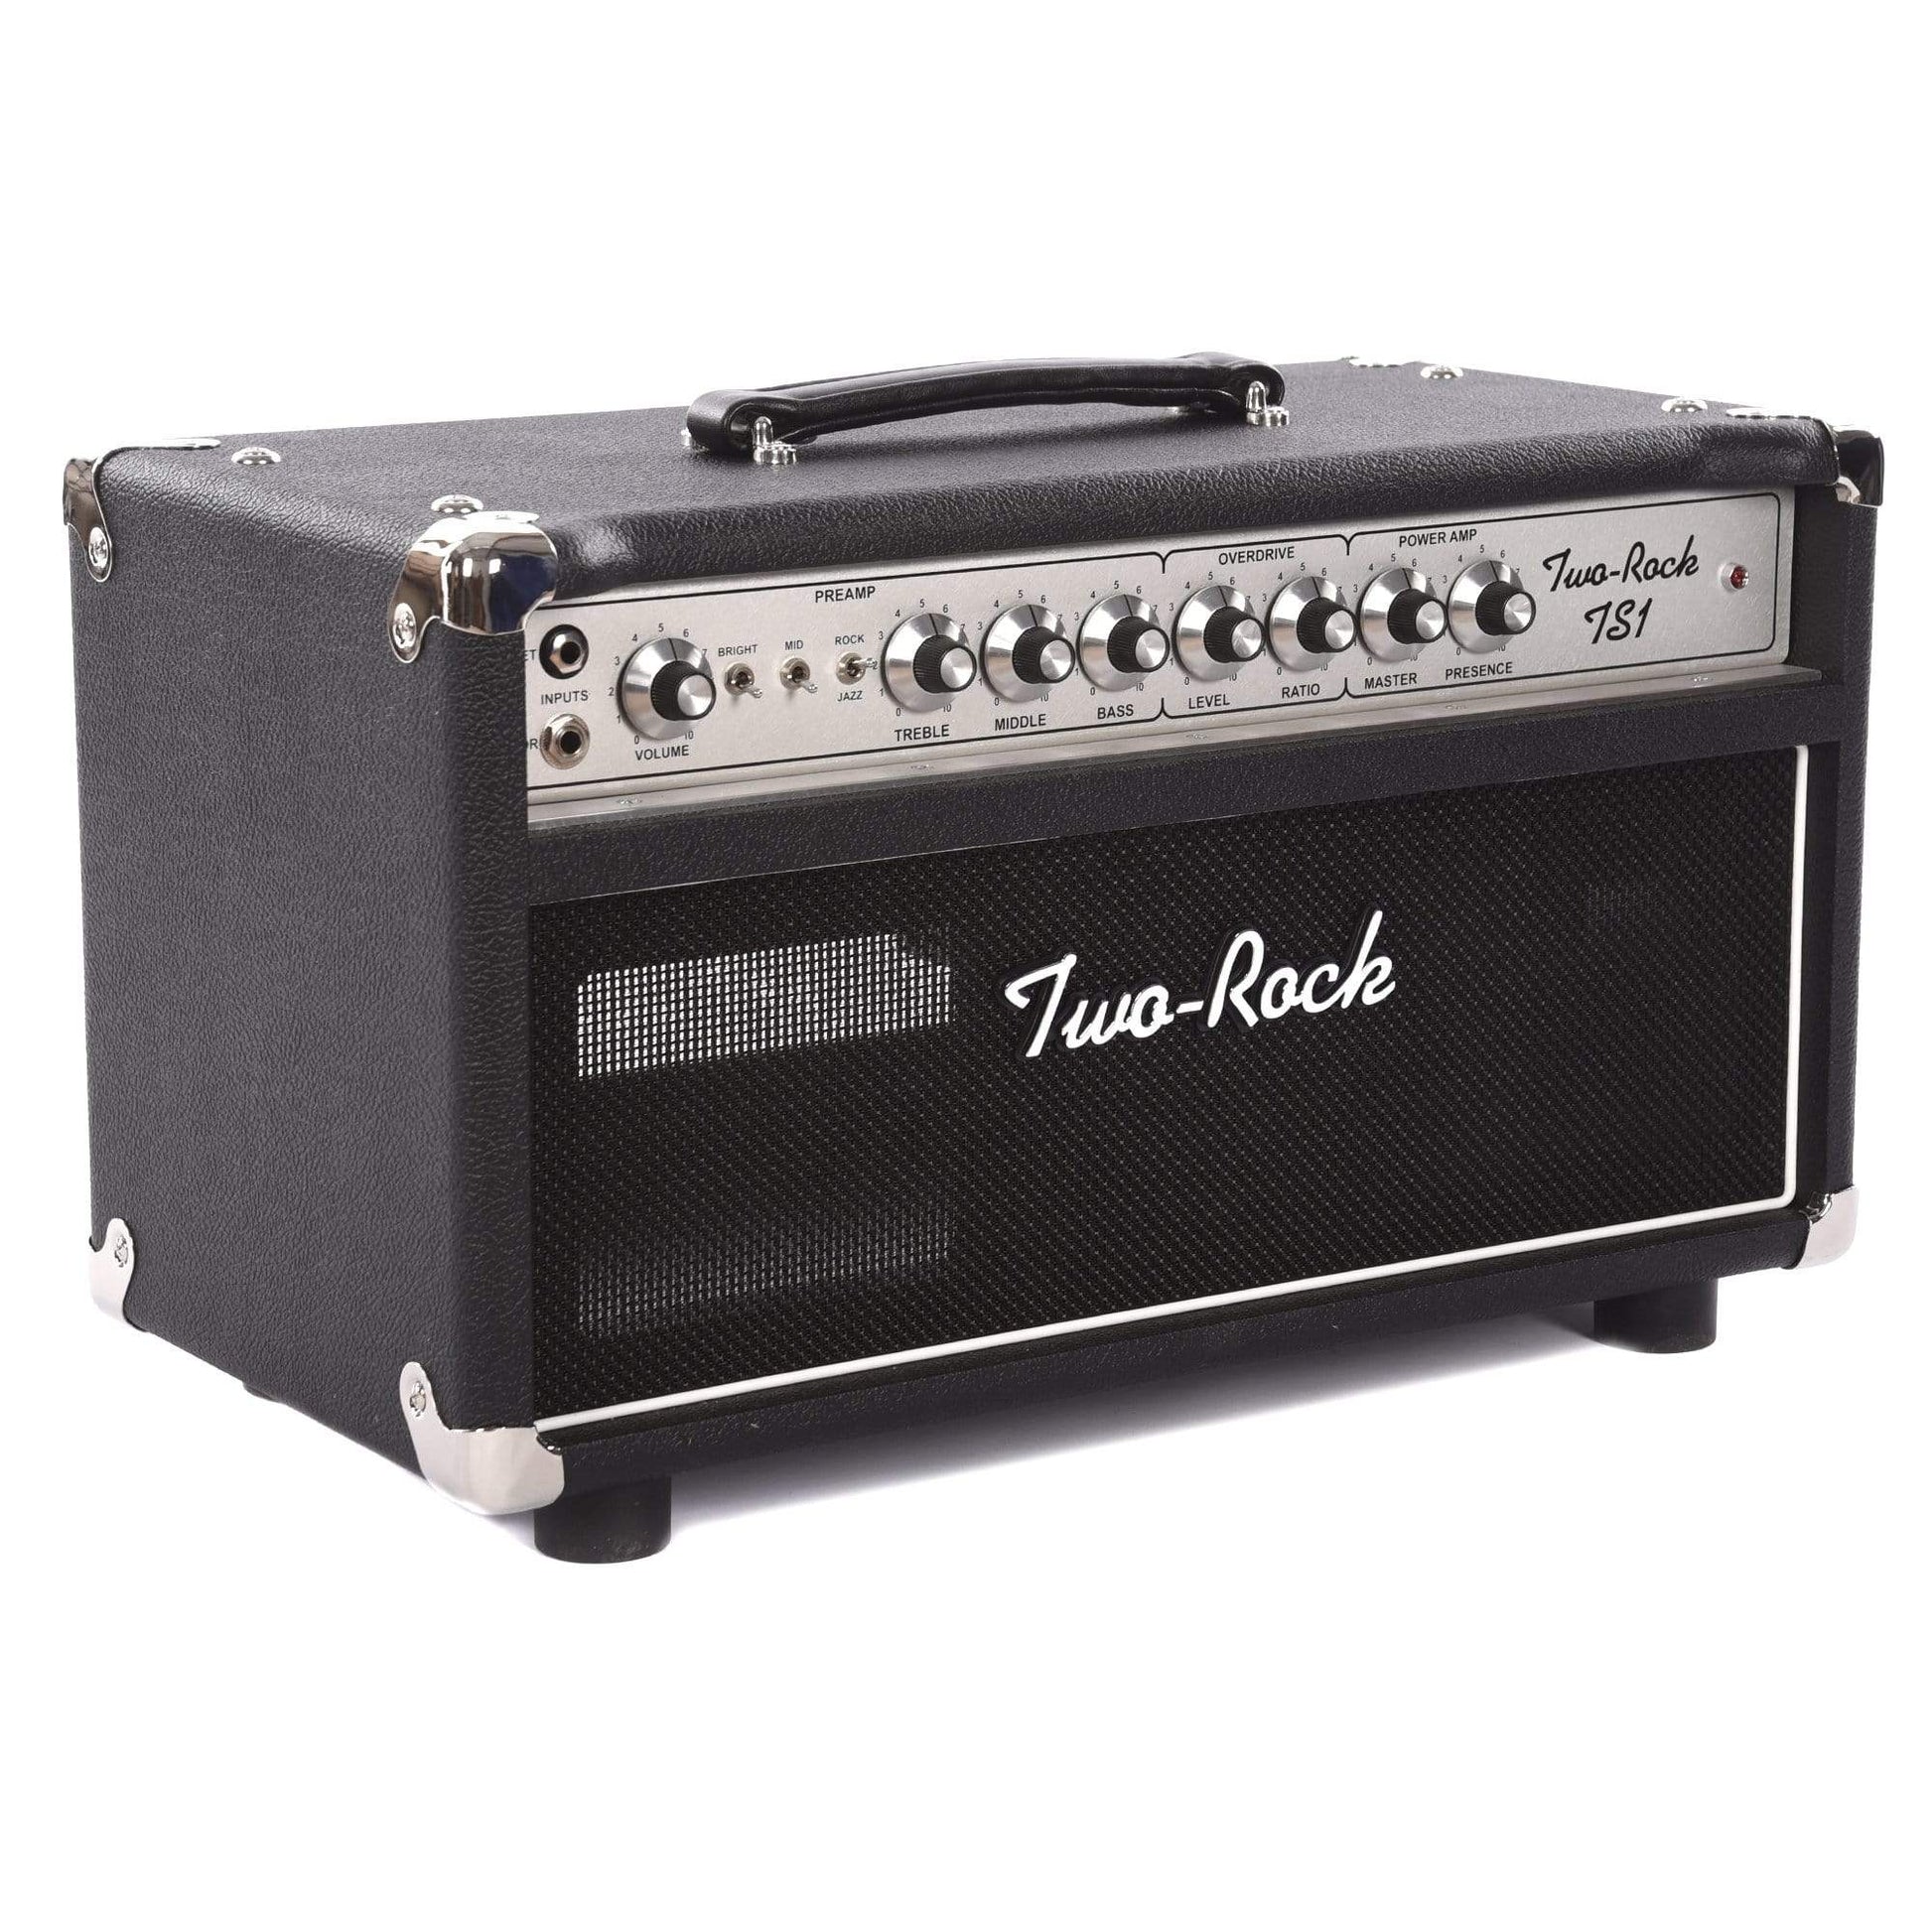 Two Rock TS1 100W Head Silver Anodized Chasis Black Bronco Tolex w/Silver Skirted Knobs Amps / Guitar Heads